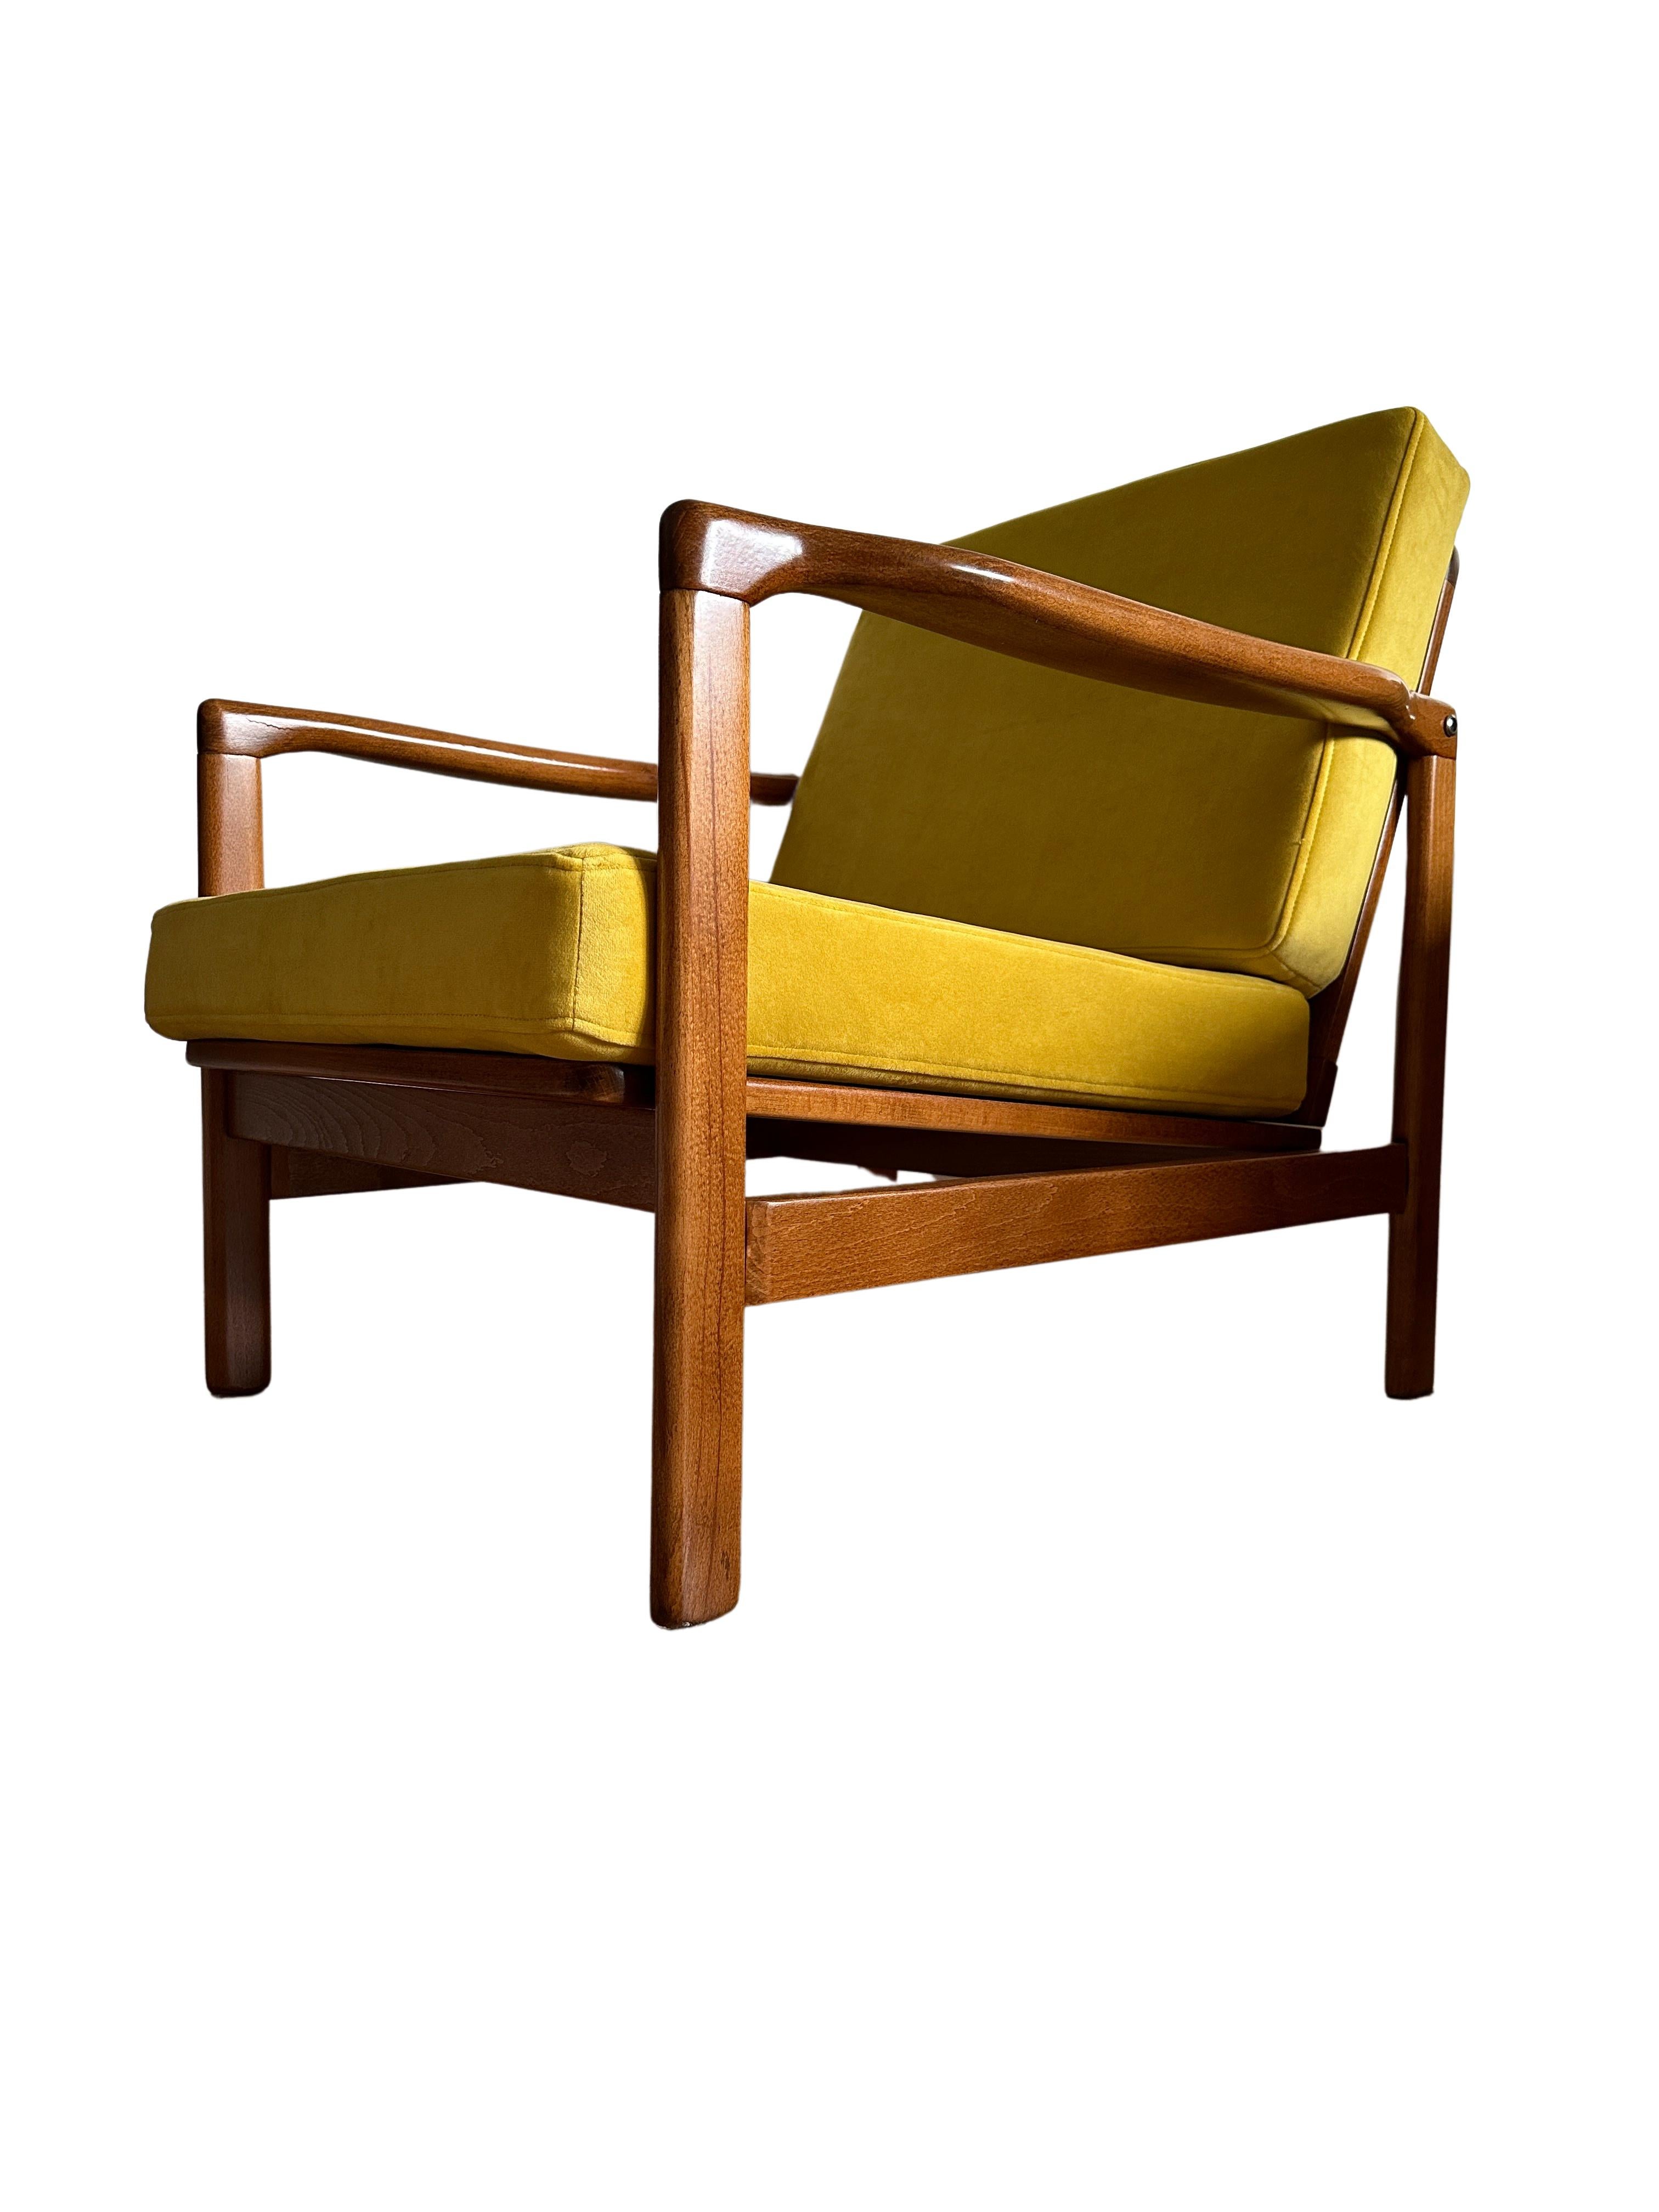 Hand-Crafted Midcentury Armchair, Yellow Velvet Upholstery, Poland, 1960s